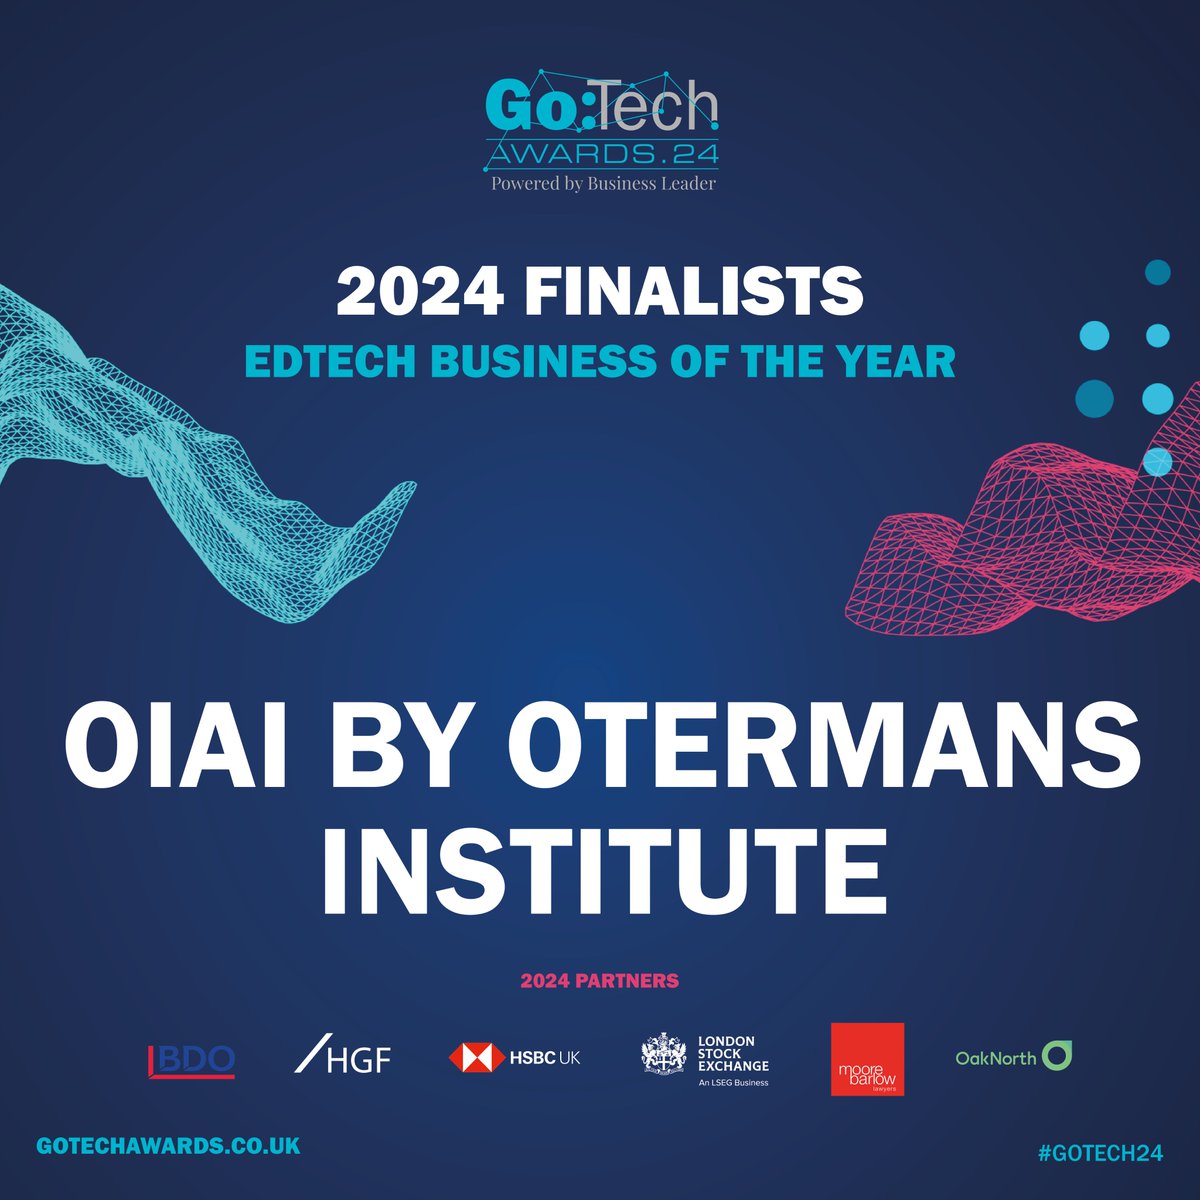 Proud to be shortlisted for the ‘Edtech Business of the Year’ award of the prestigious Go:Tech Awards 2024! #upskillingageneration #innovation #education #proudmoments #gotech24